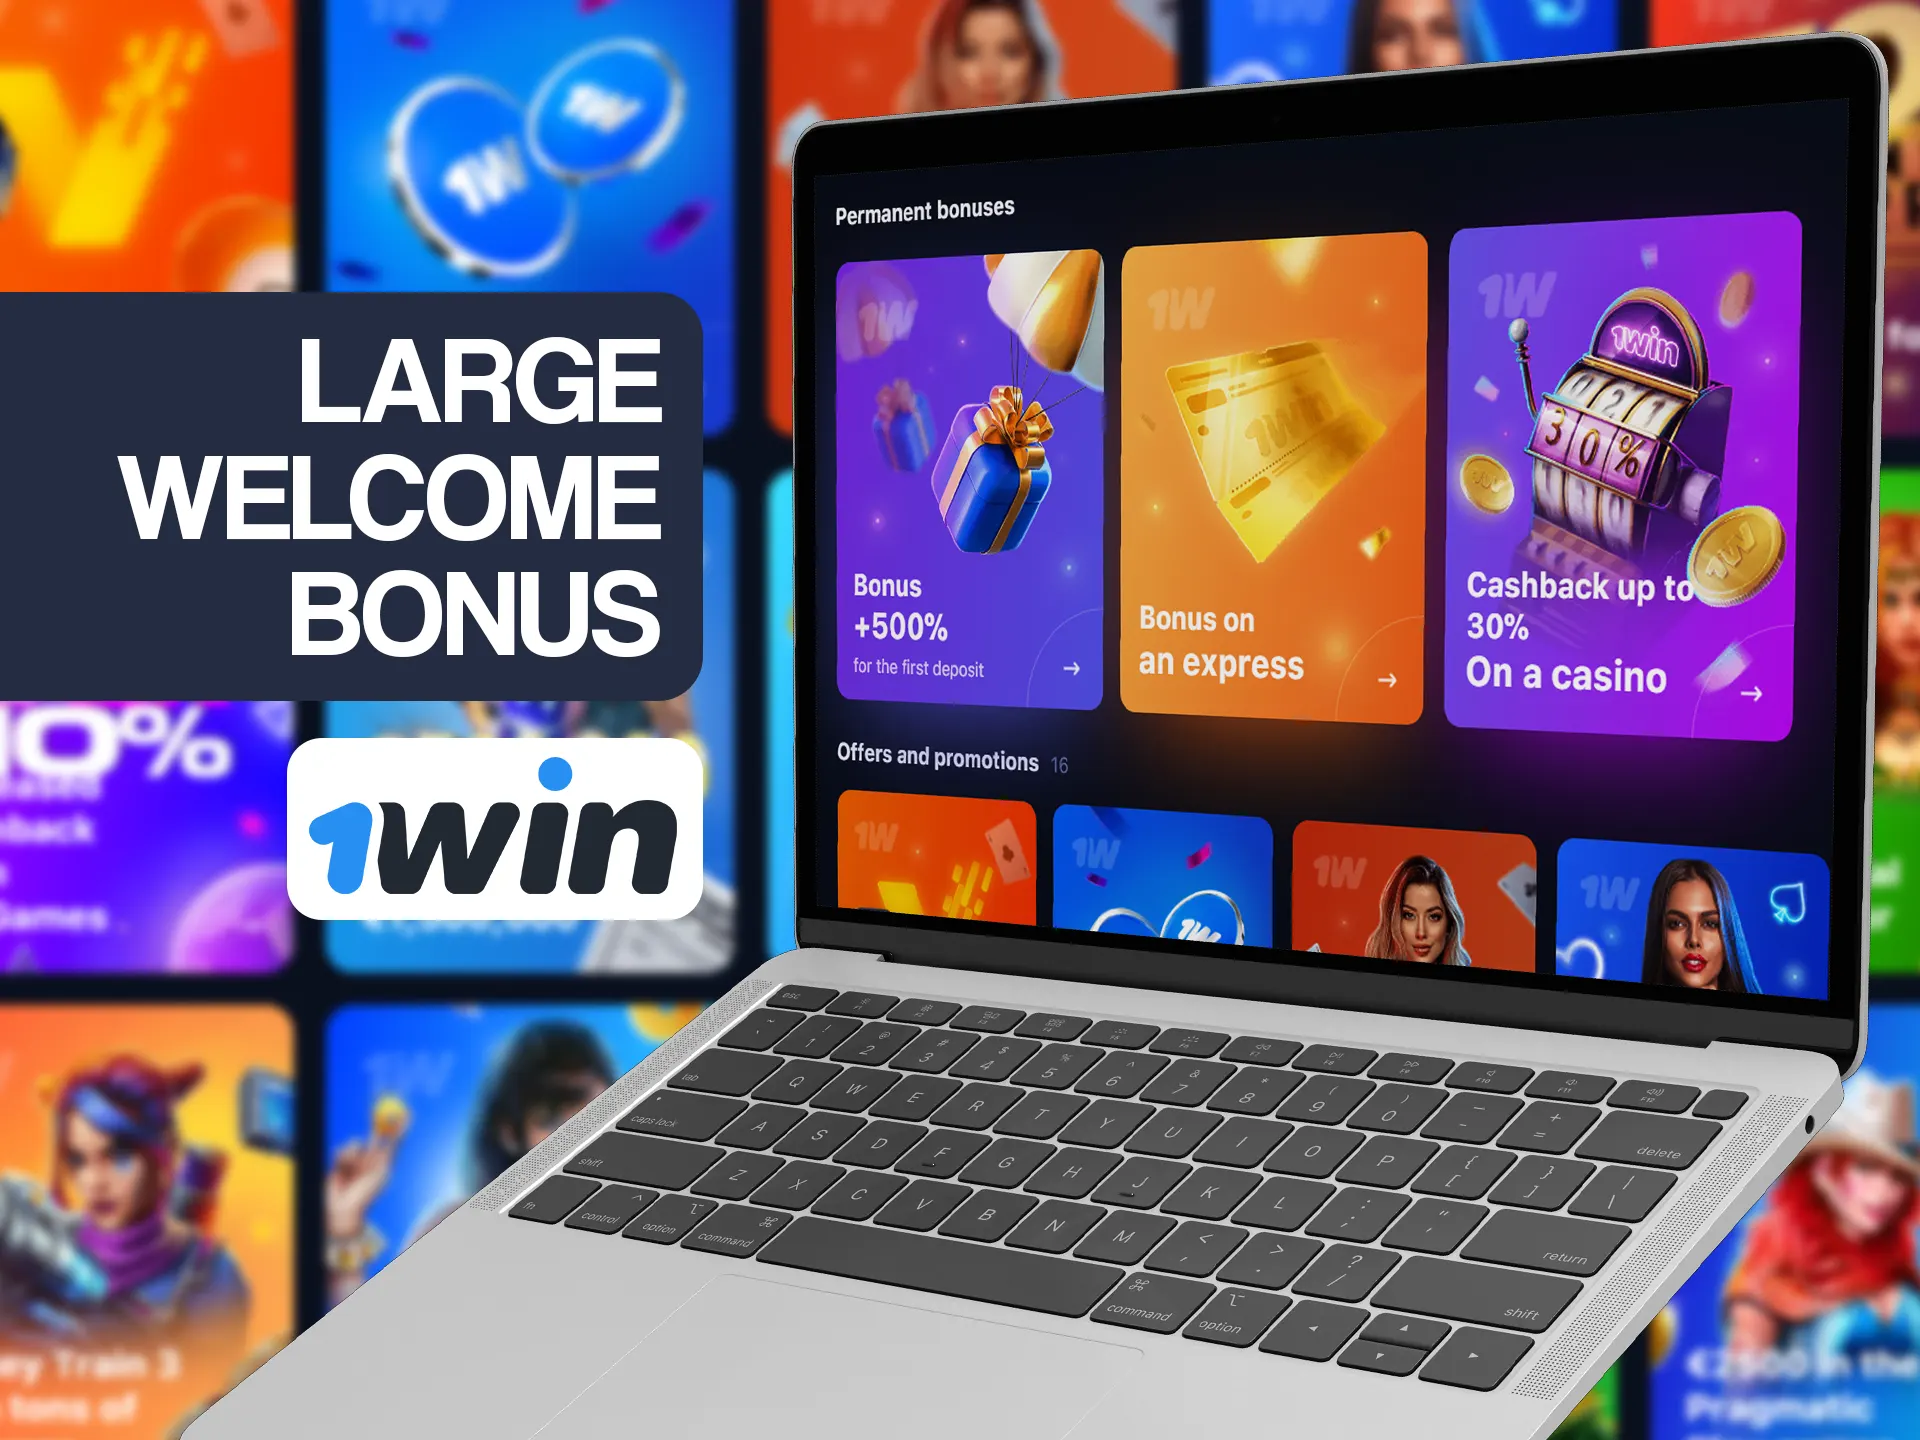 Get your welcome bonus after making account at 1win.